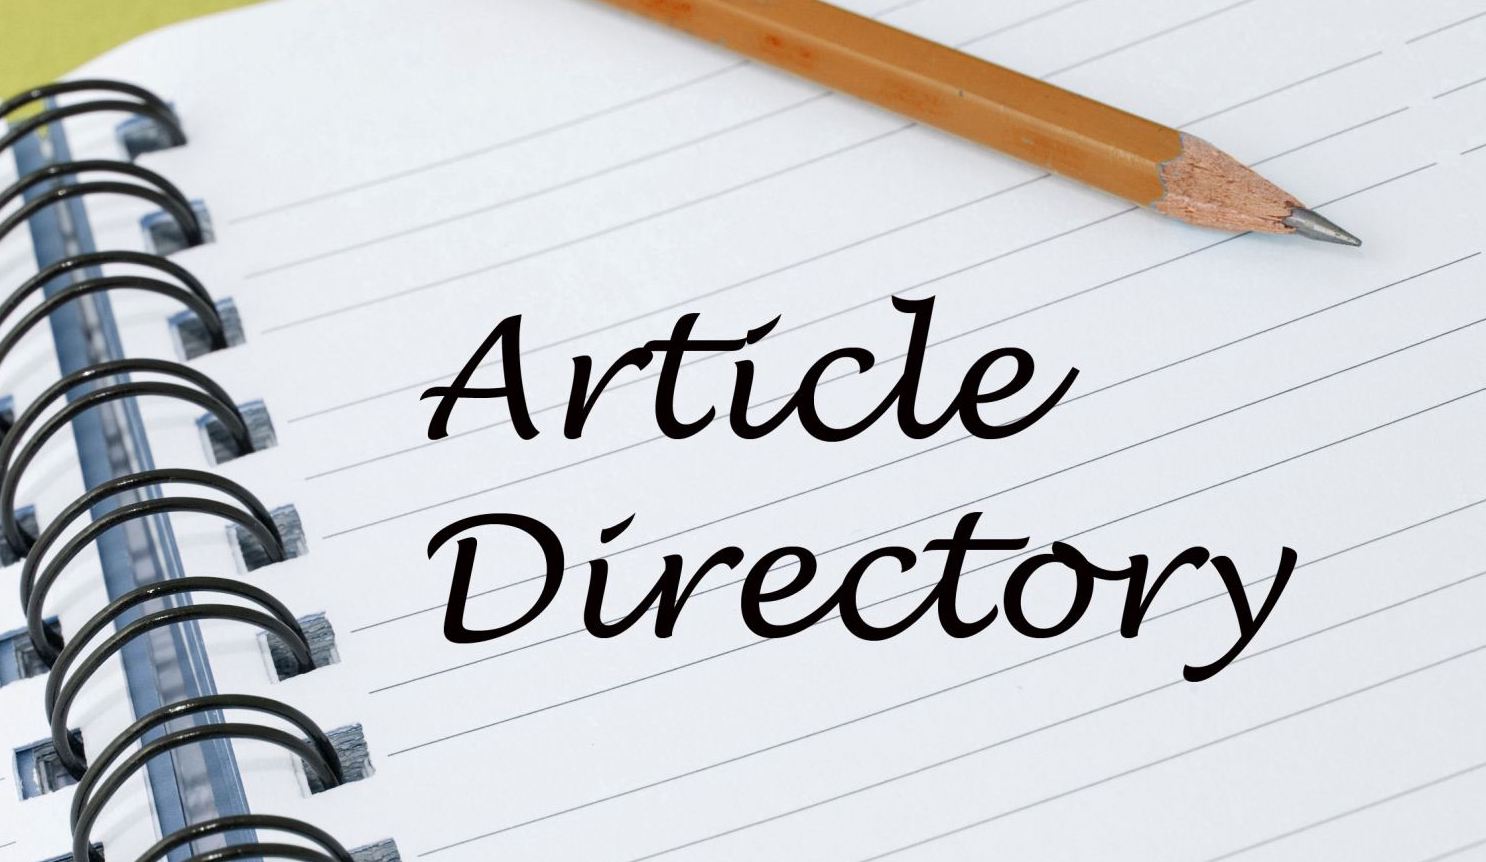 Article Directory With Revenue Share – What Is the Deal?